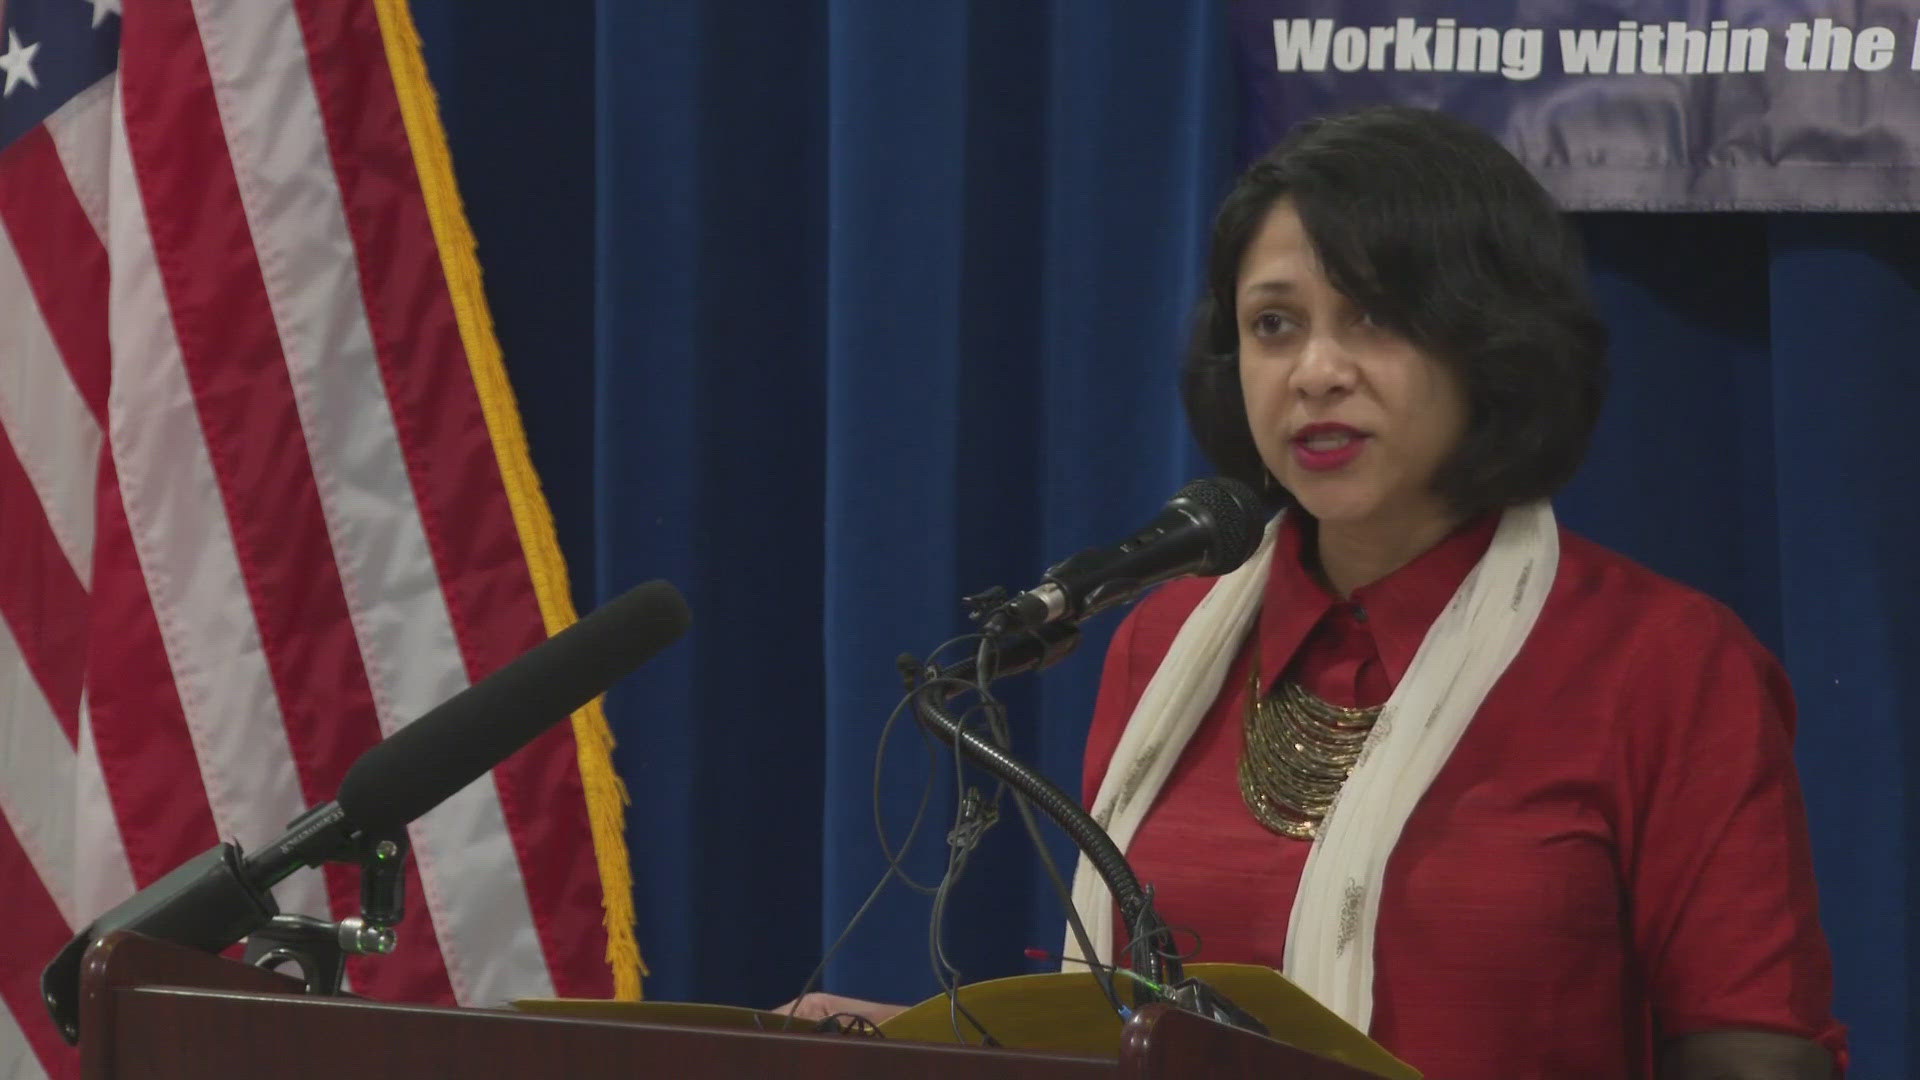 Rep. Nima Kulkarni said her team is “absolutely taking this to the Supreme Court.”